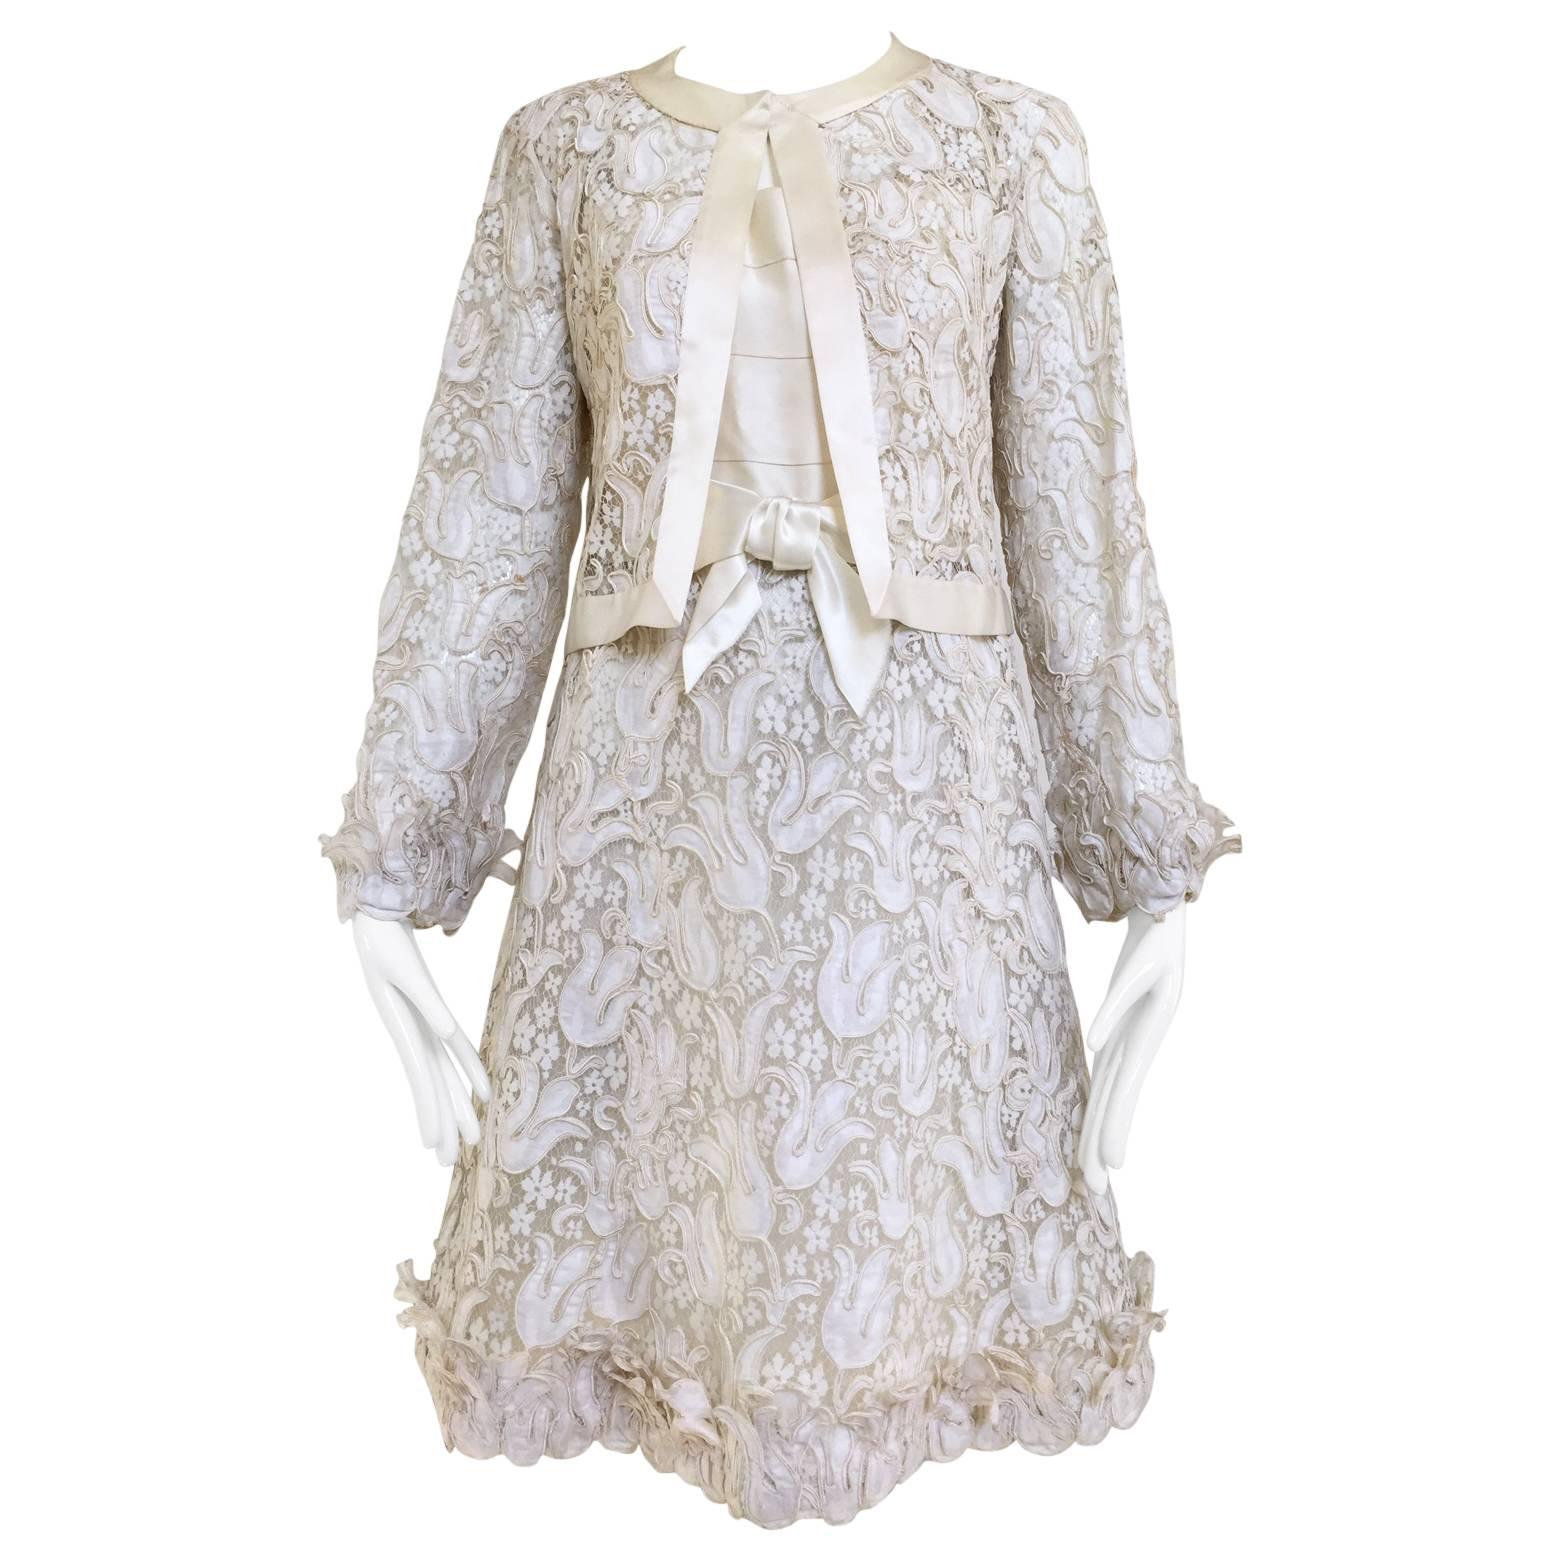 1960s CHANEL creme Darquer lace dress and jacket ensemble